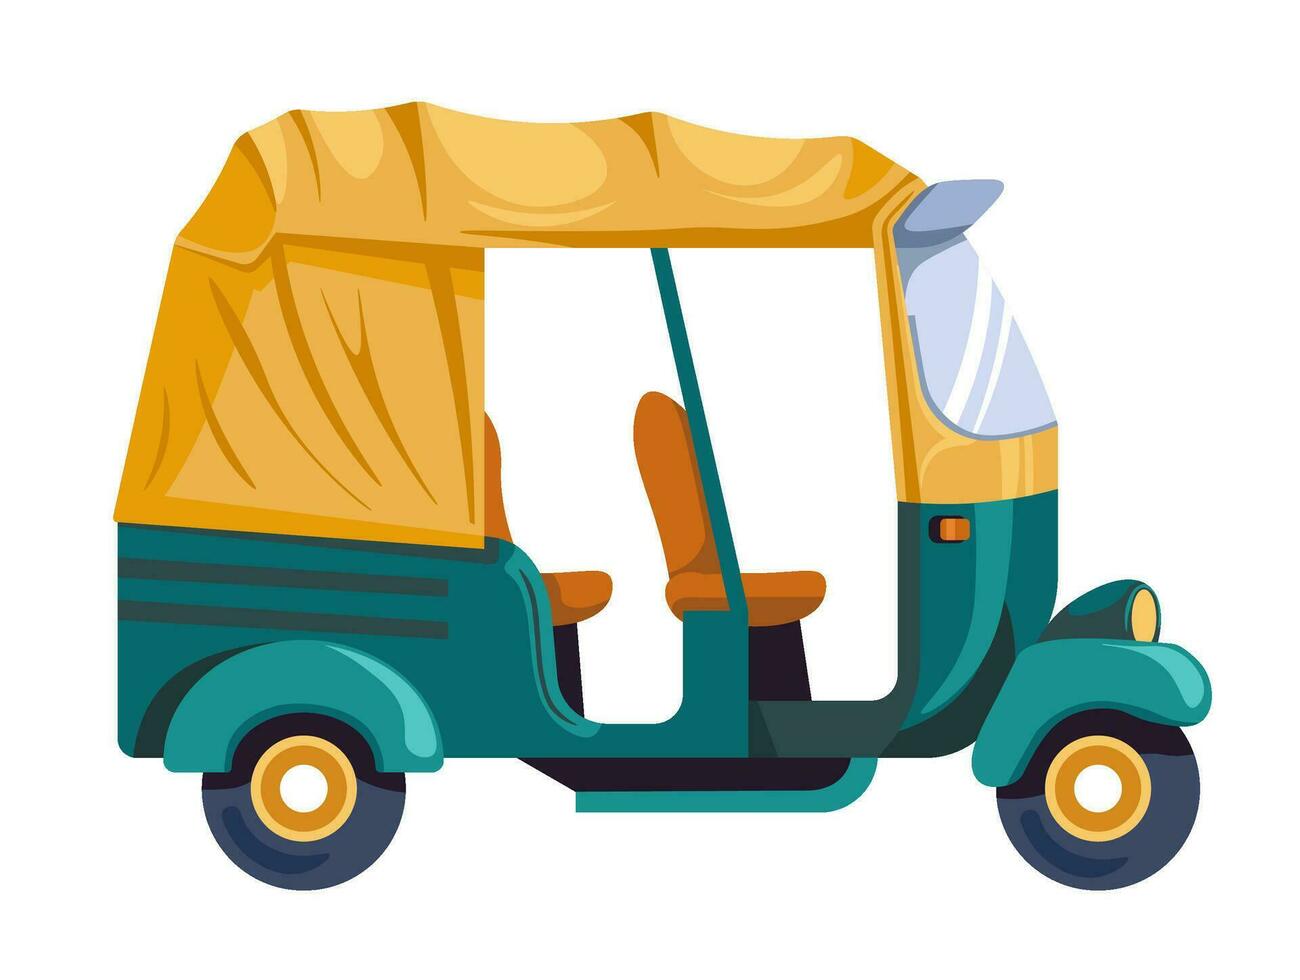 Exotic country taxi, small vehicle or bus transport vector